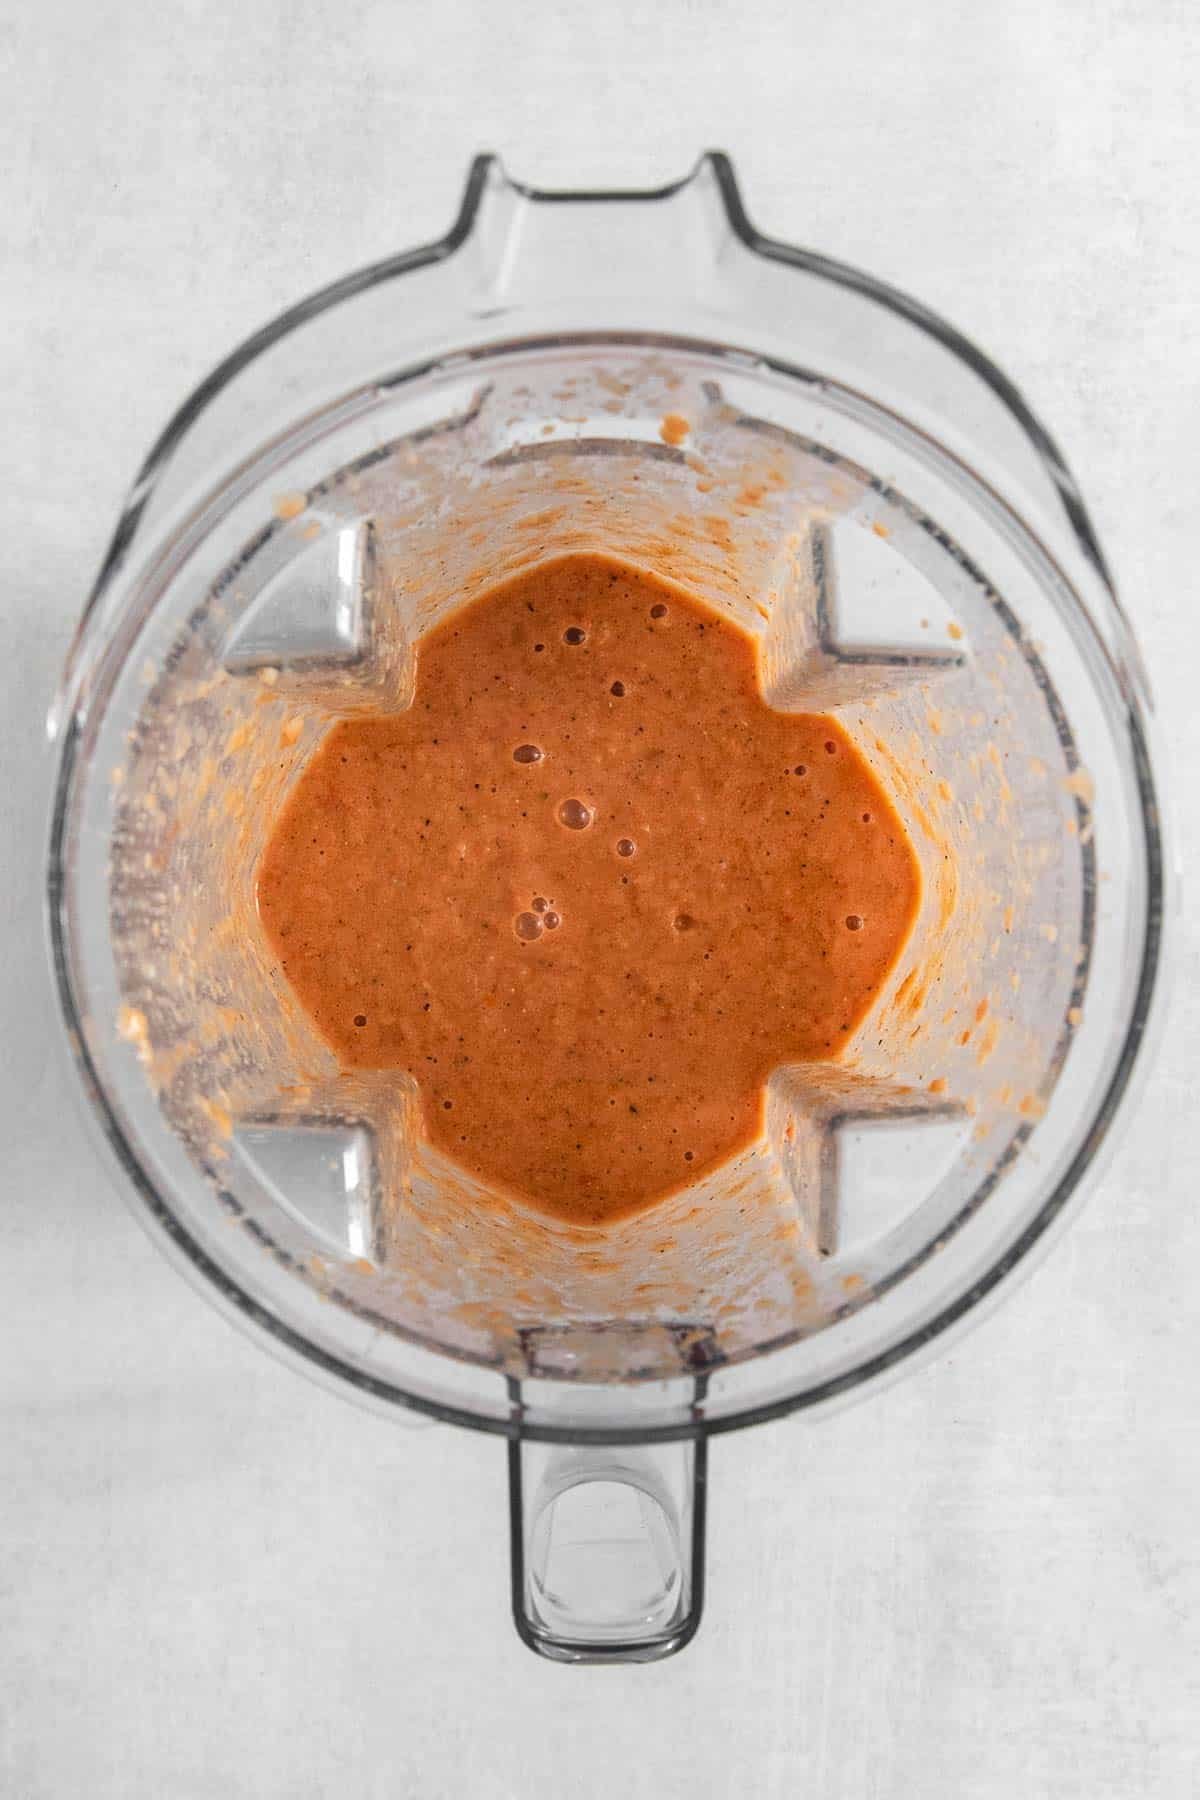 A blender with a creamy red sauce in it.